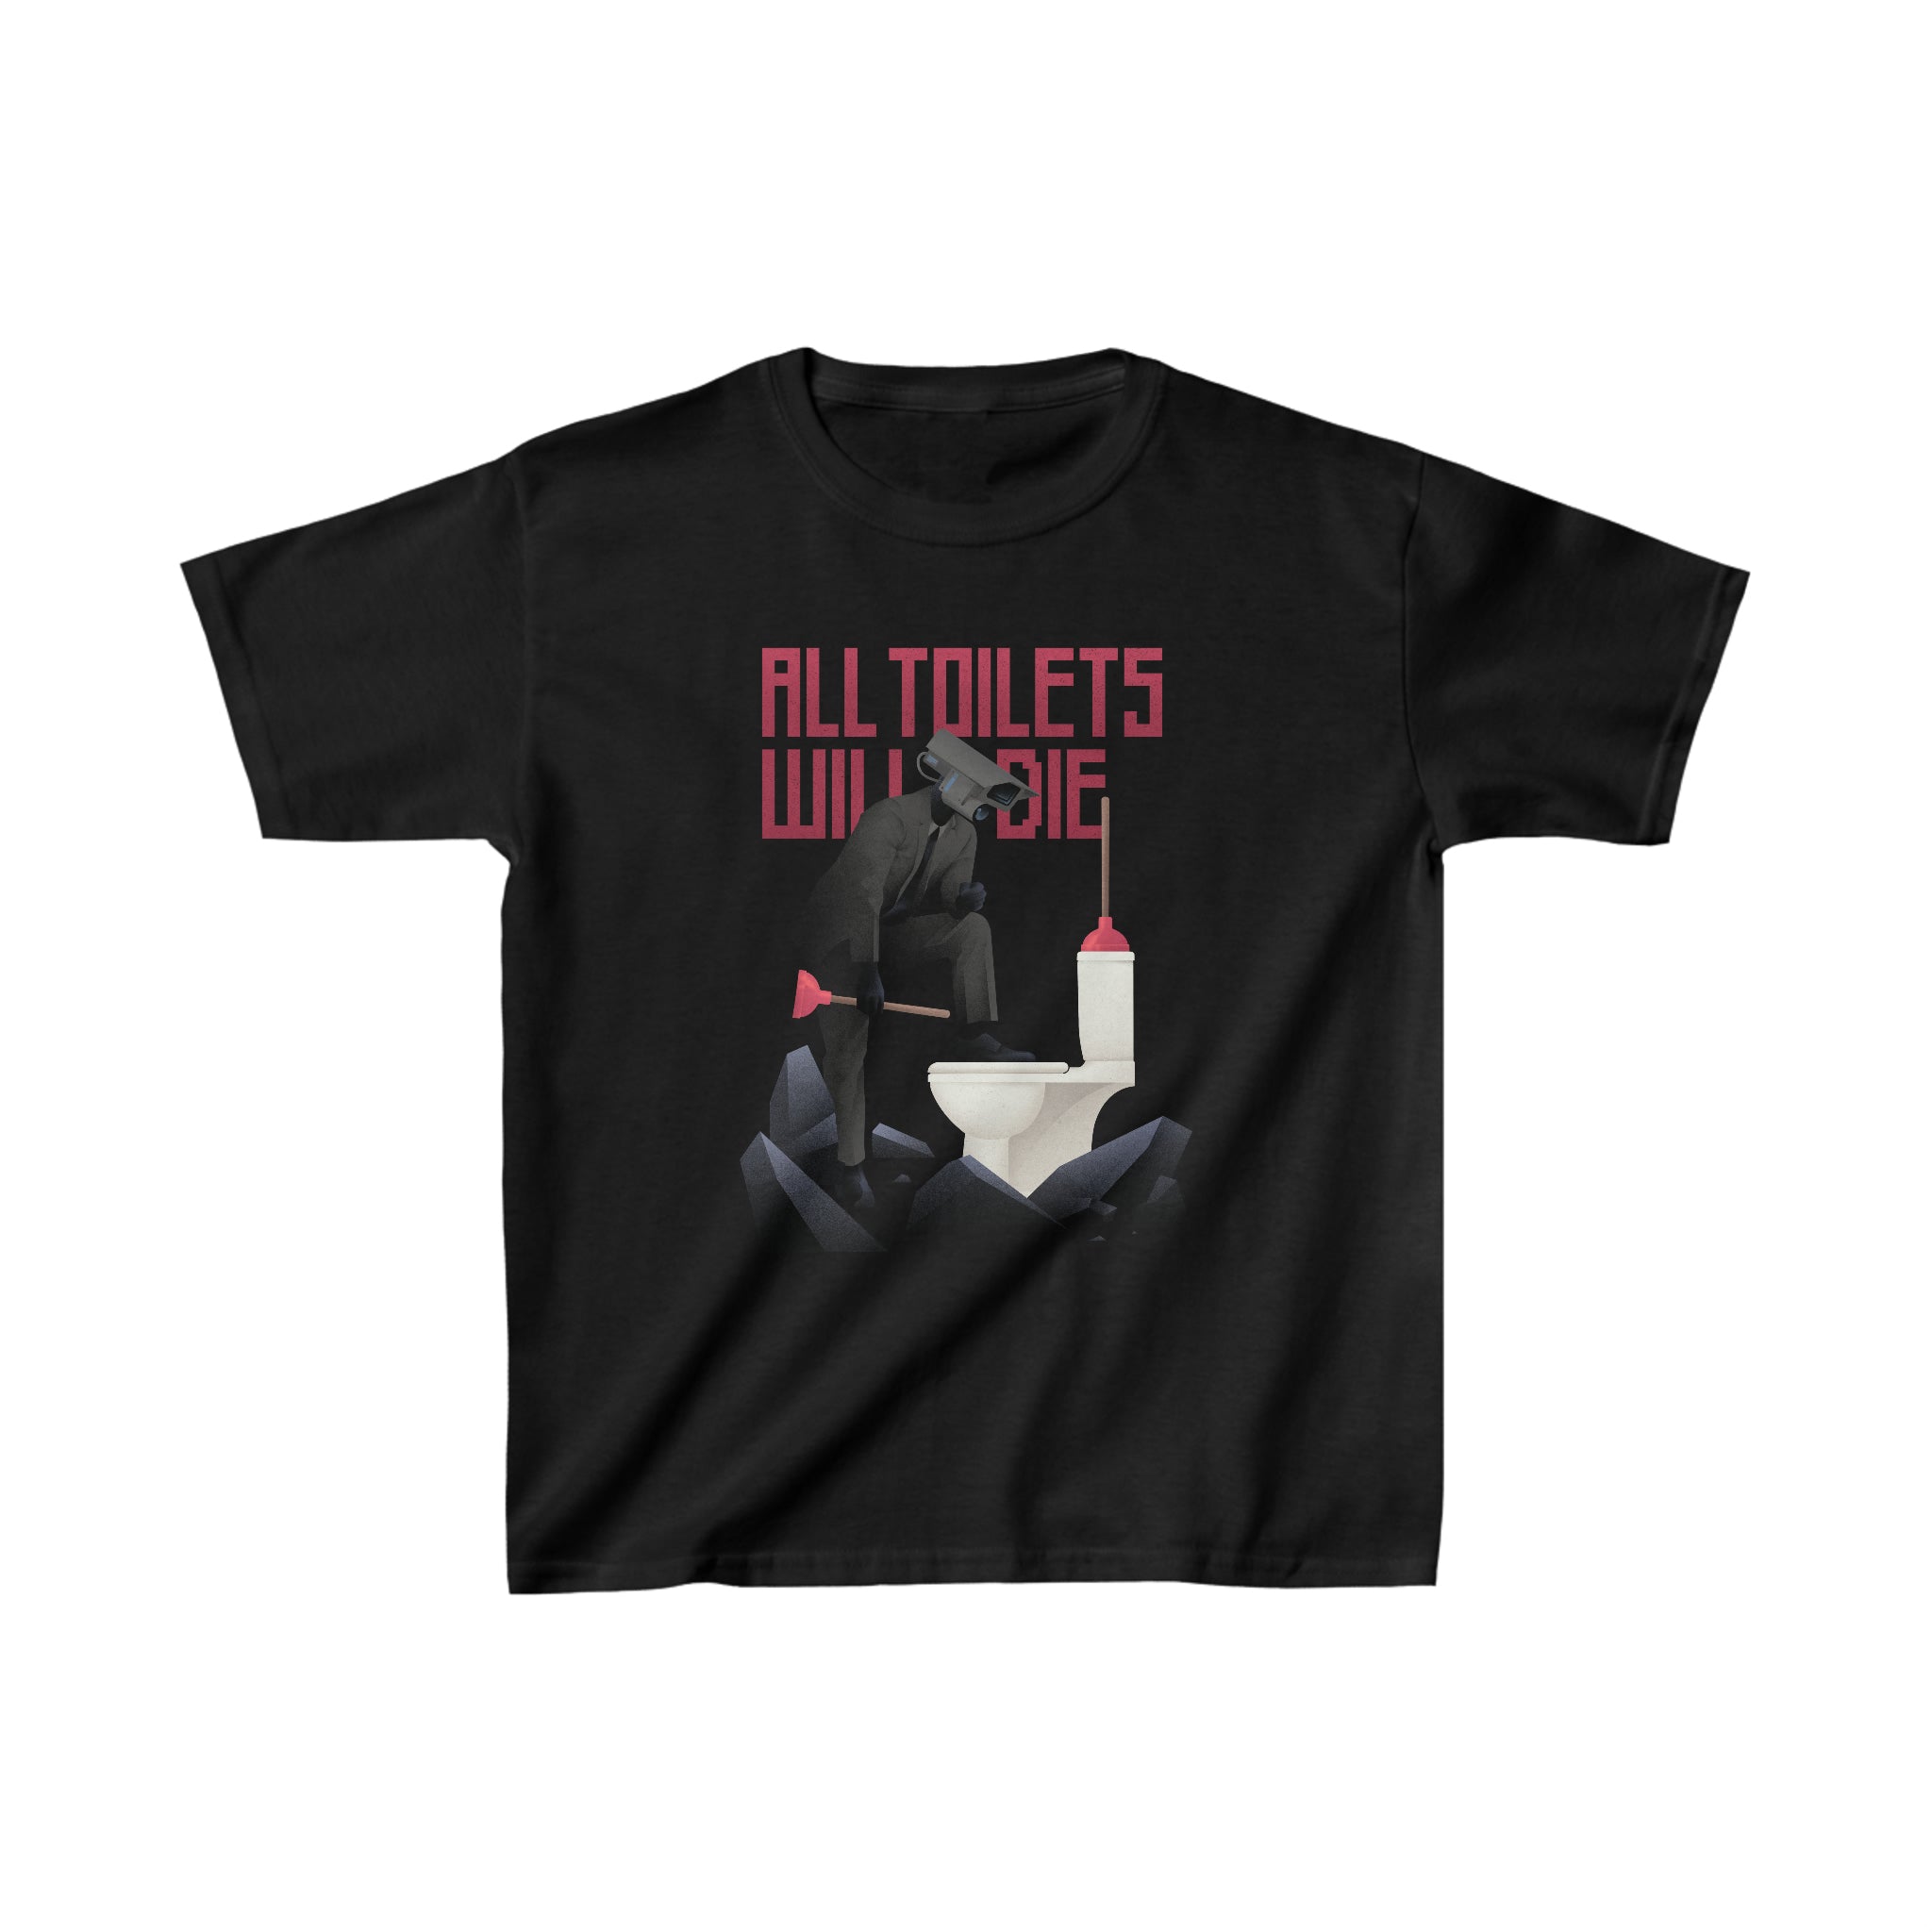 All Toilets Will Die Youth Tee, black Tee featuring image of Plungerman standing on a skibidi toilet, with text behind him saying ALL TOILETS WILL DIE